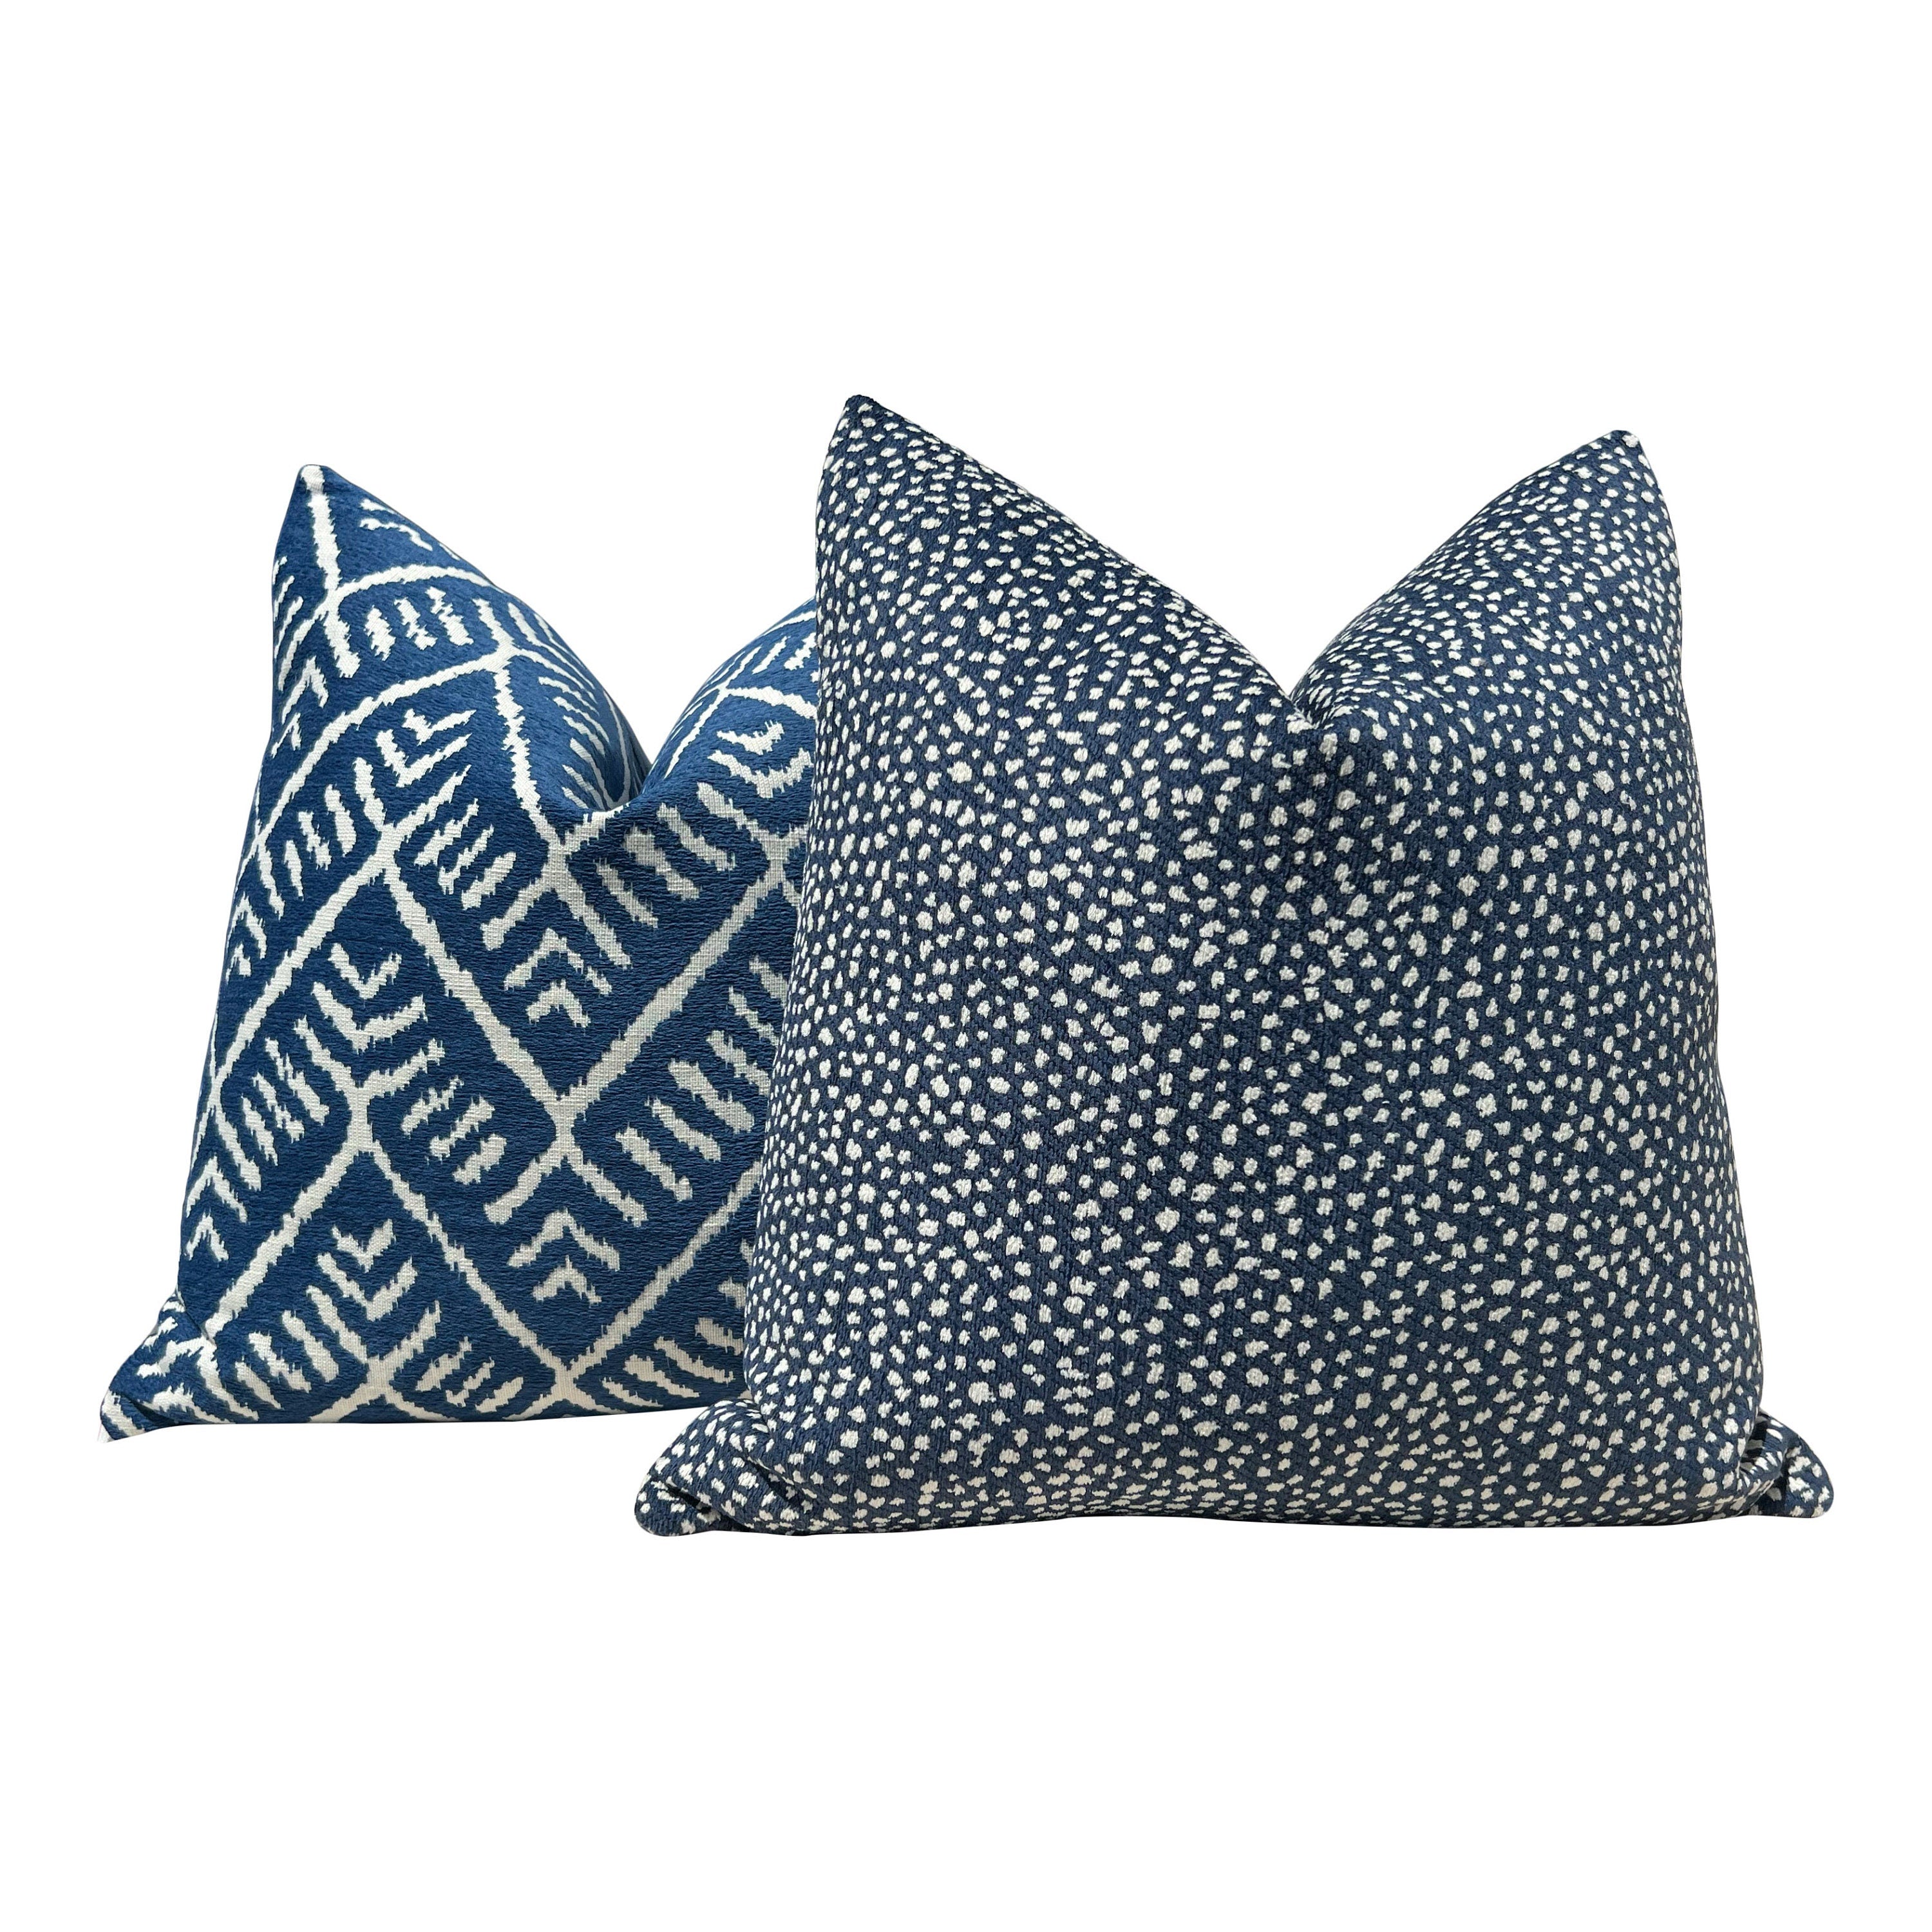 Outdoor Tahoe Geometric Pillow in Denim. Zig Zag Blue Decorative Pillow Cover, Designers Chevron Outdoor Lumbar Pillow in Blue and White,